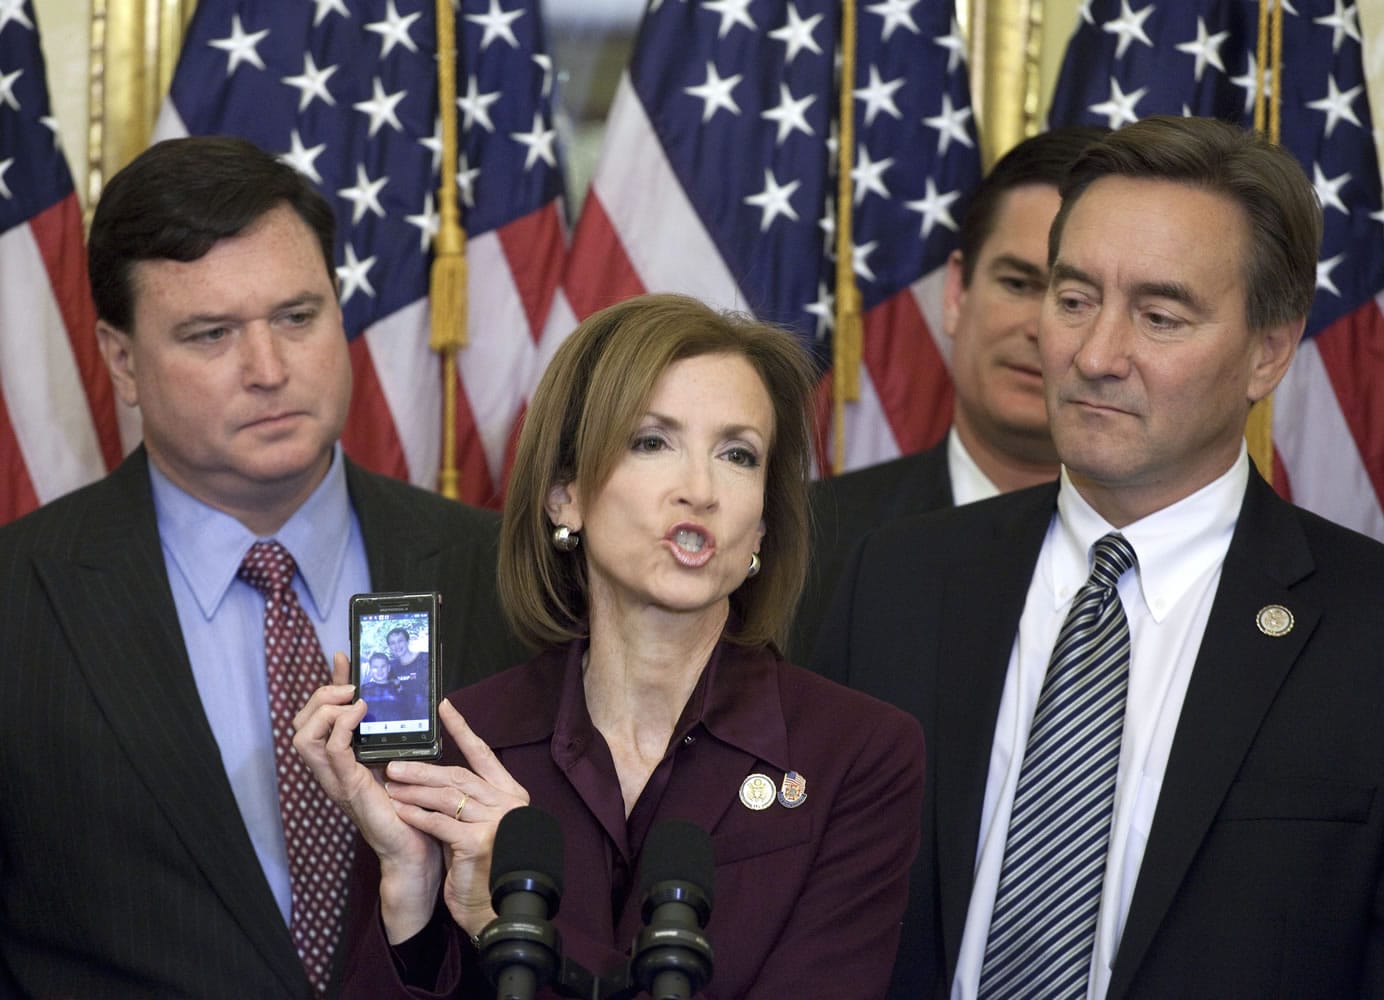 Rep. Nan Hayworth, R-N.Y., center, accompanied by, from left, Rep. Todd Rokita, R-Ind., Rep. Austin Scott, R-G., and Rep. Rick Berg, R-N.D., shows a photo of her children, Will and Jack, during a House Republican freshmen news conference on Capitol Hill in Washington, Thursday, Nov. 17, 2011, to discuss a Balanced Budget Amendment.